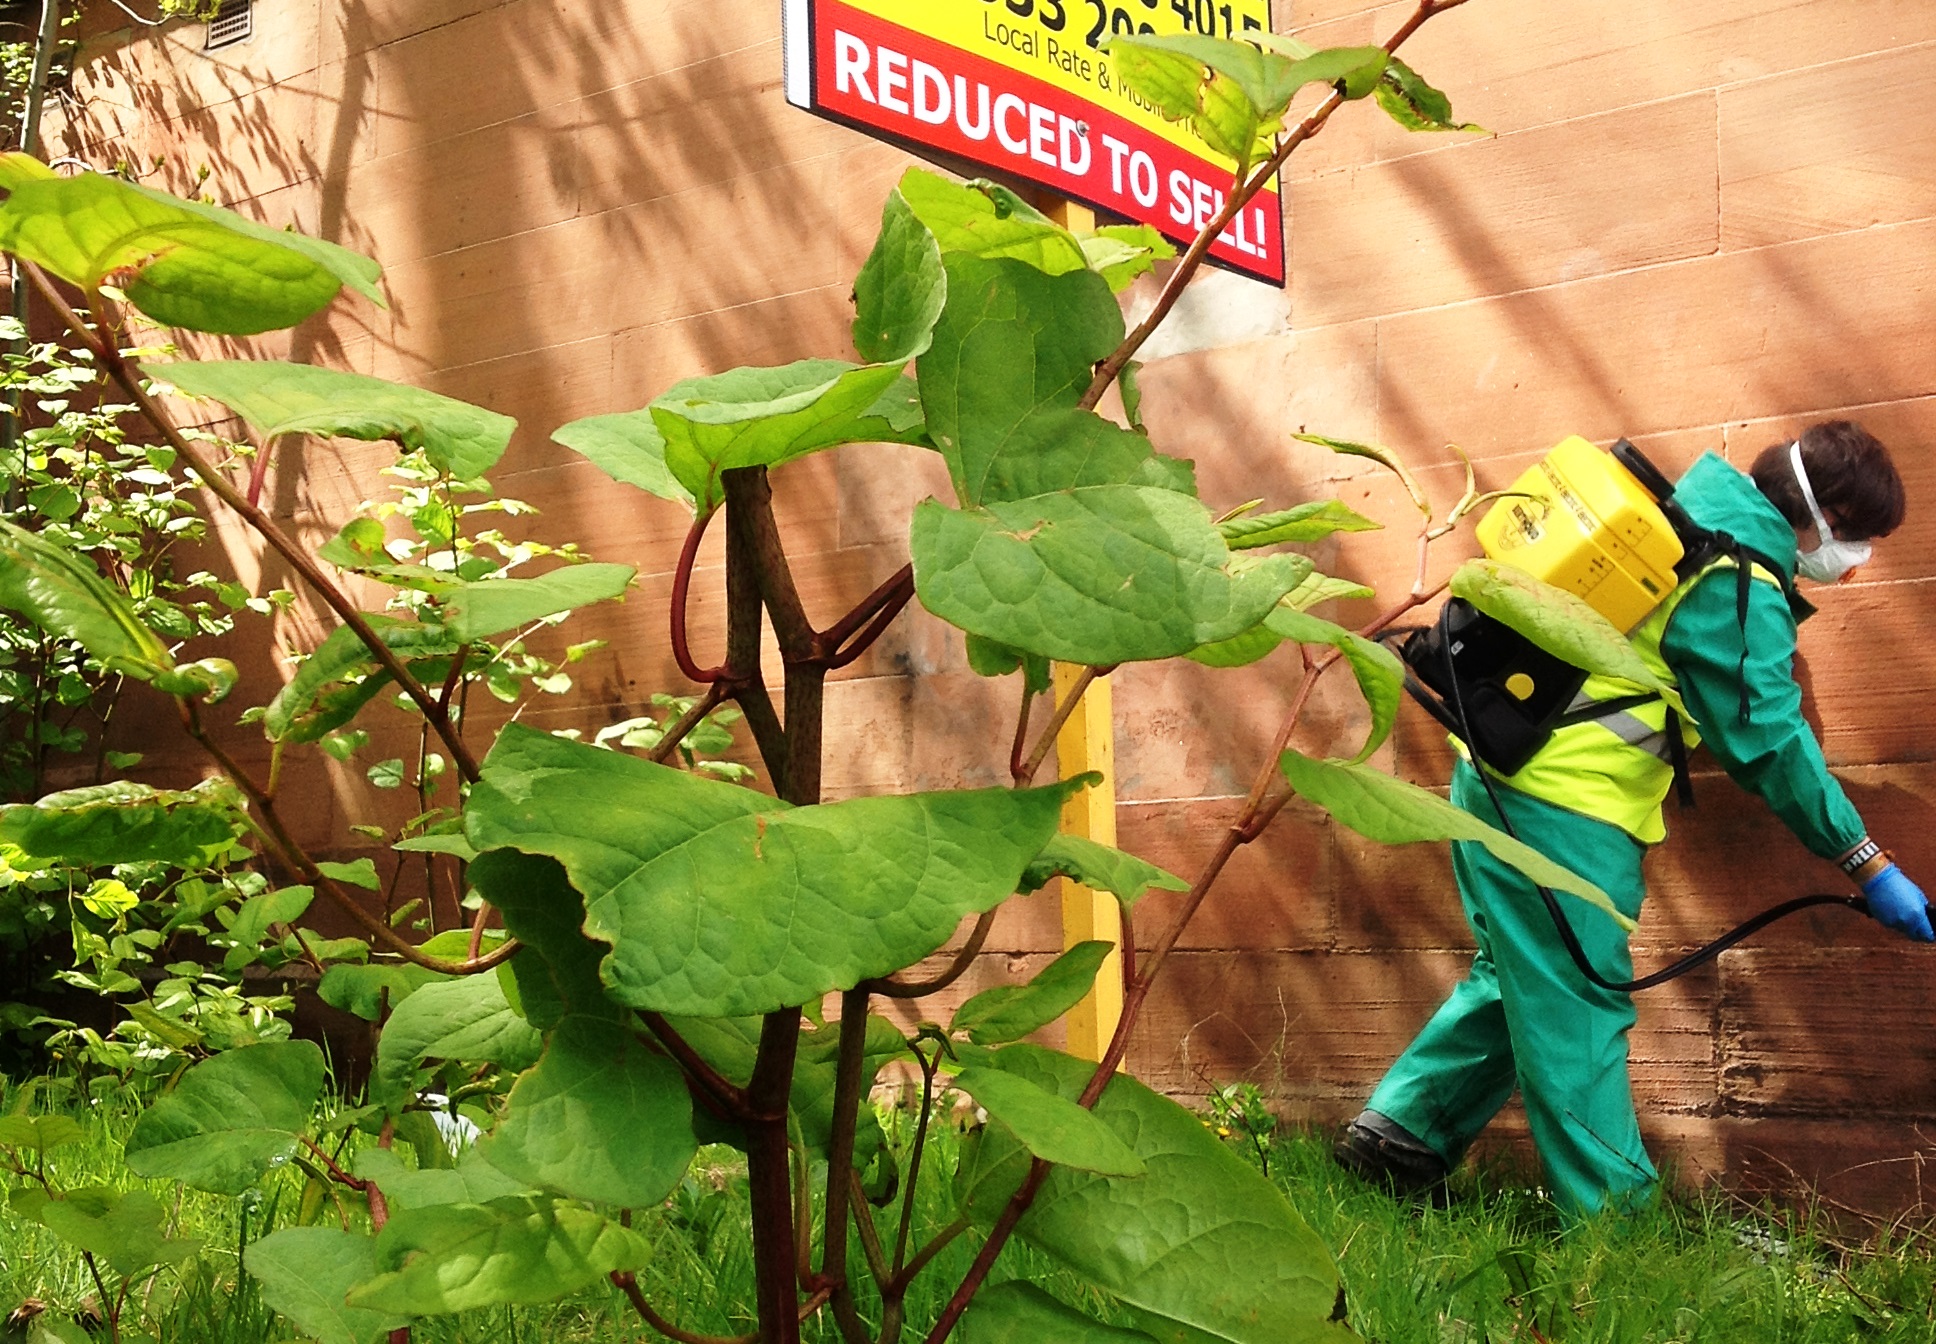 Japanese Knotweed removal to sell home